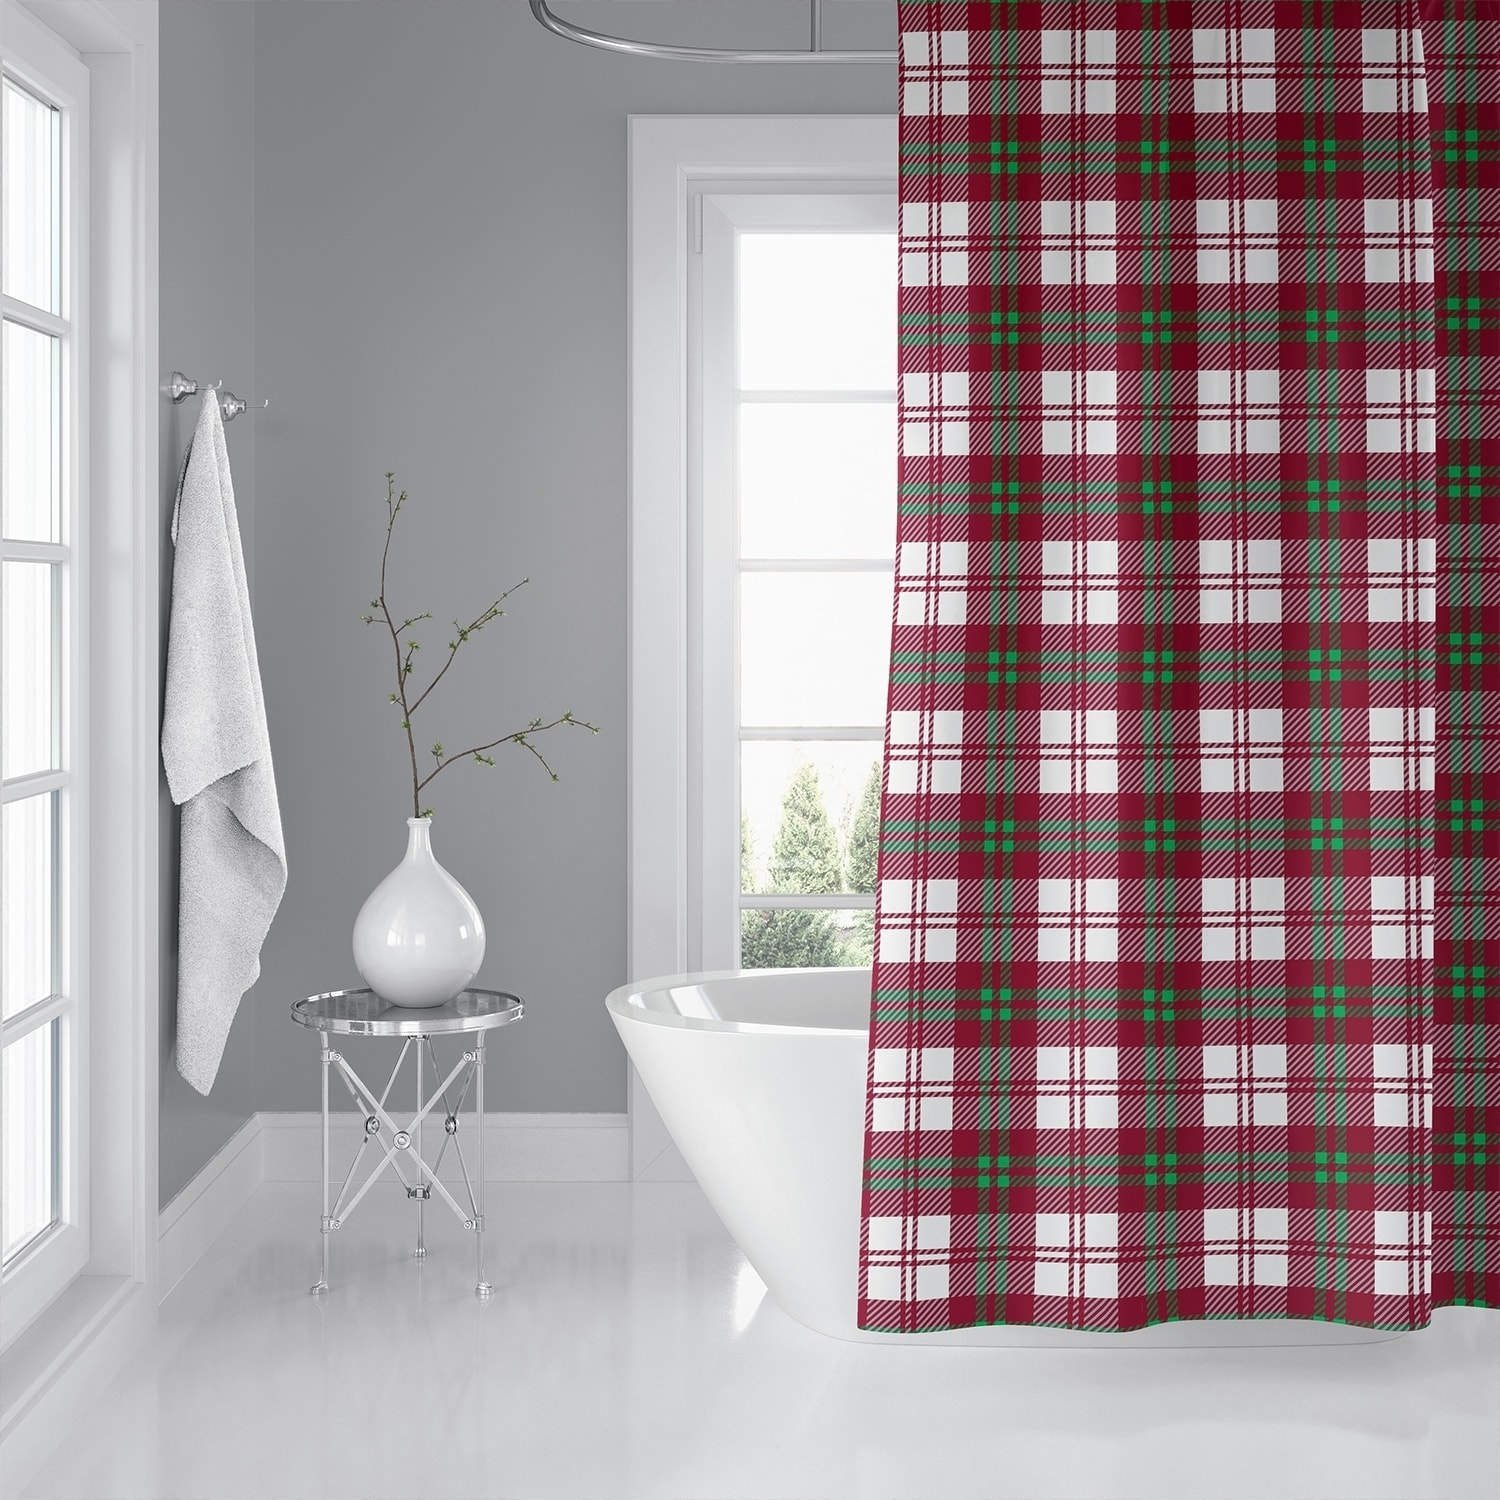 Christmas Fabric Shower Curtain Plaid Burgundy Red Green Ivory Pattern 